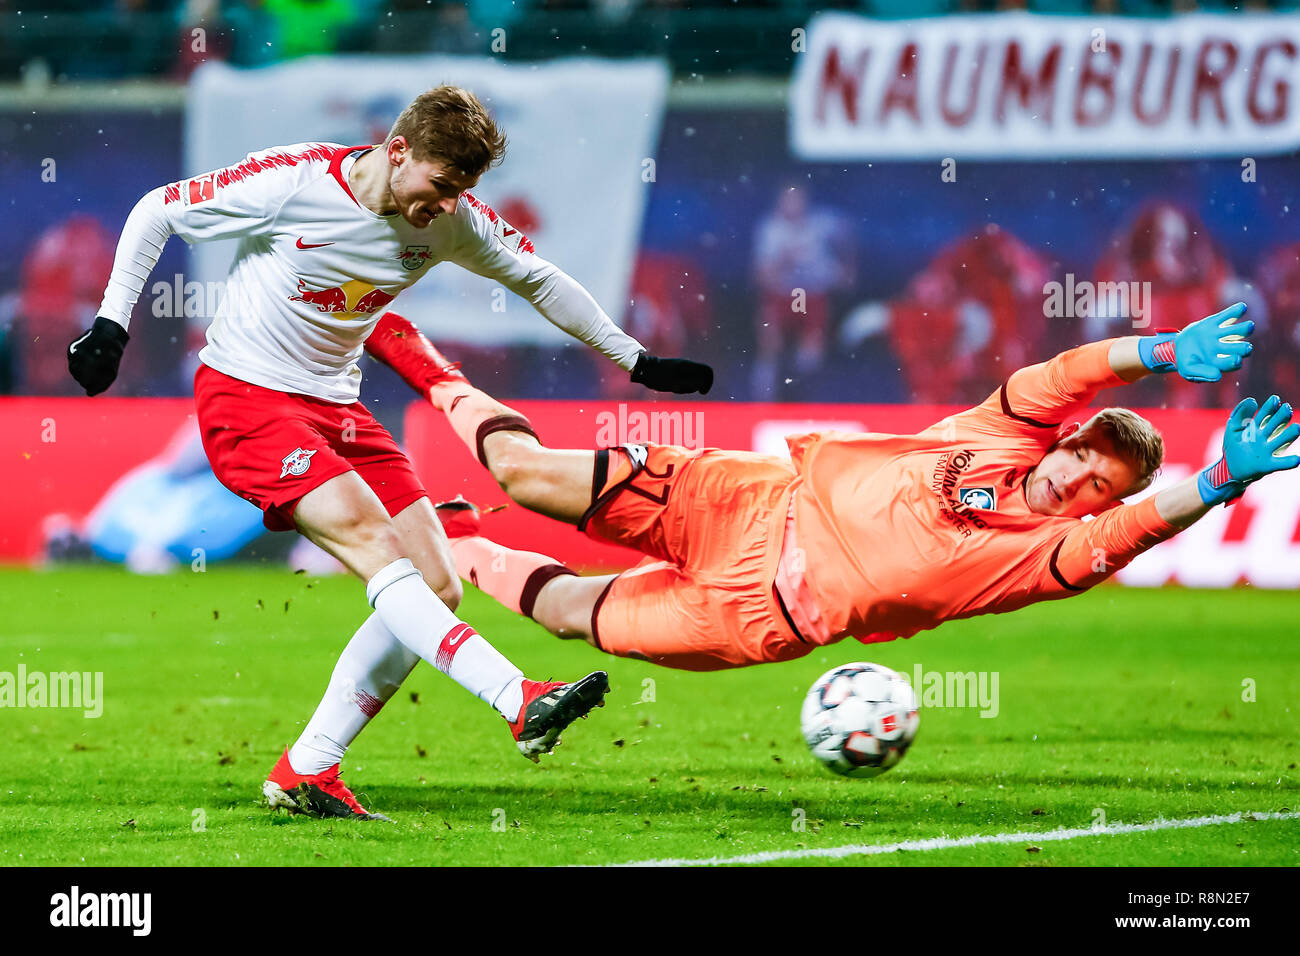 Leipzig, Germany. 16th Dec, 2018. Timo Werner (L) of Leipzig shoots during the Bundesliga match between RB Leipzig and FSV Mainz 05 in Leipzig, Germany, Dec. 16, 2018. Leipzig won 4-1. Credit: Kevin Voigt/Xinhua/Alamy Live News Stock Photo